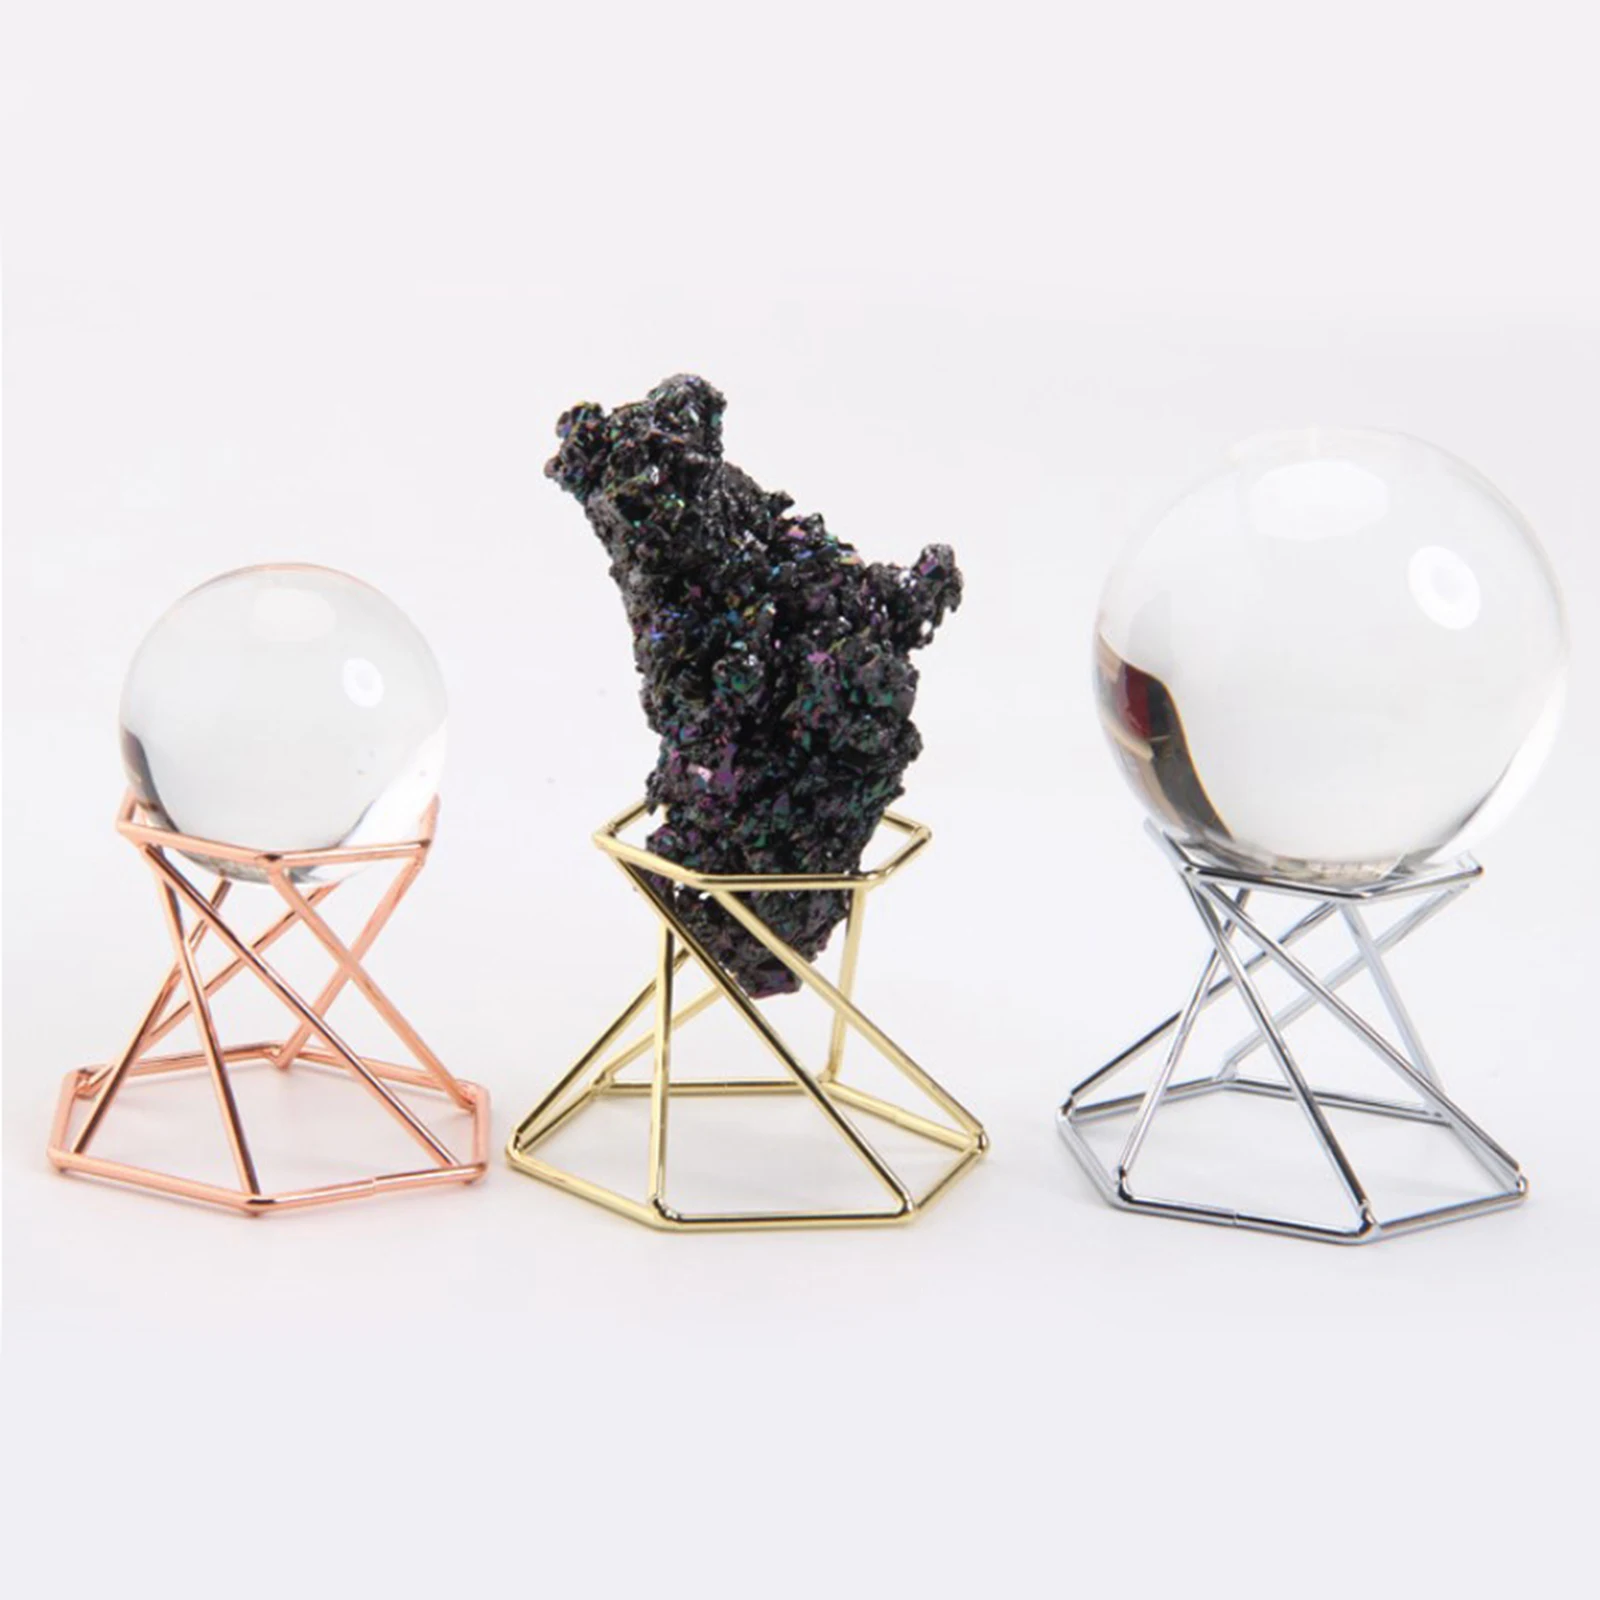 Details about   Metal Flower Display Stand For Crystal Glass Lens Ball Photography Base & Holder 